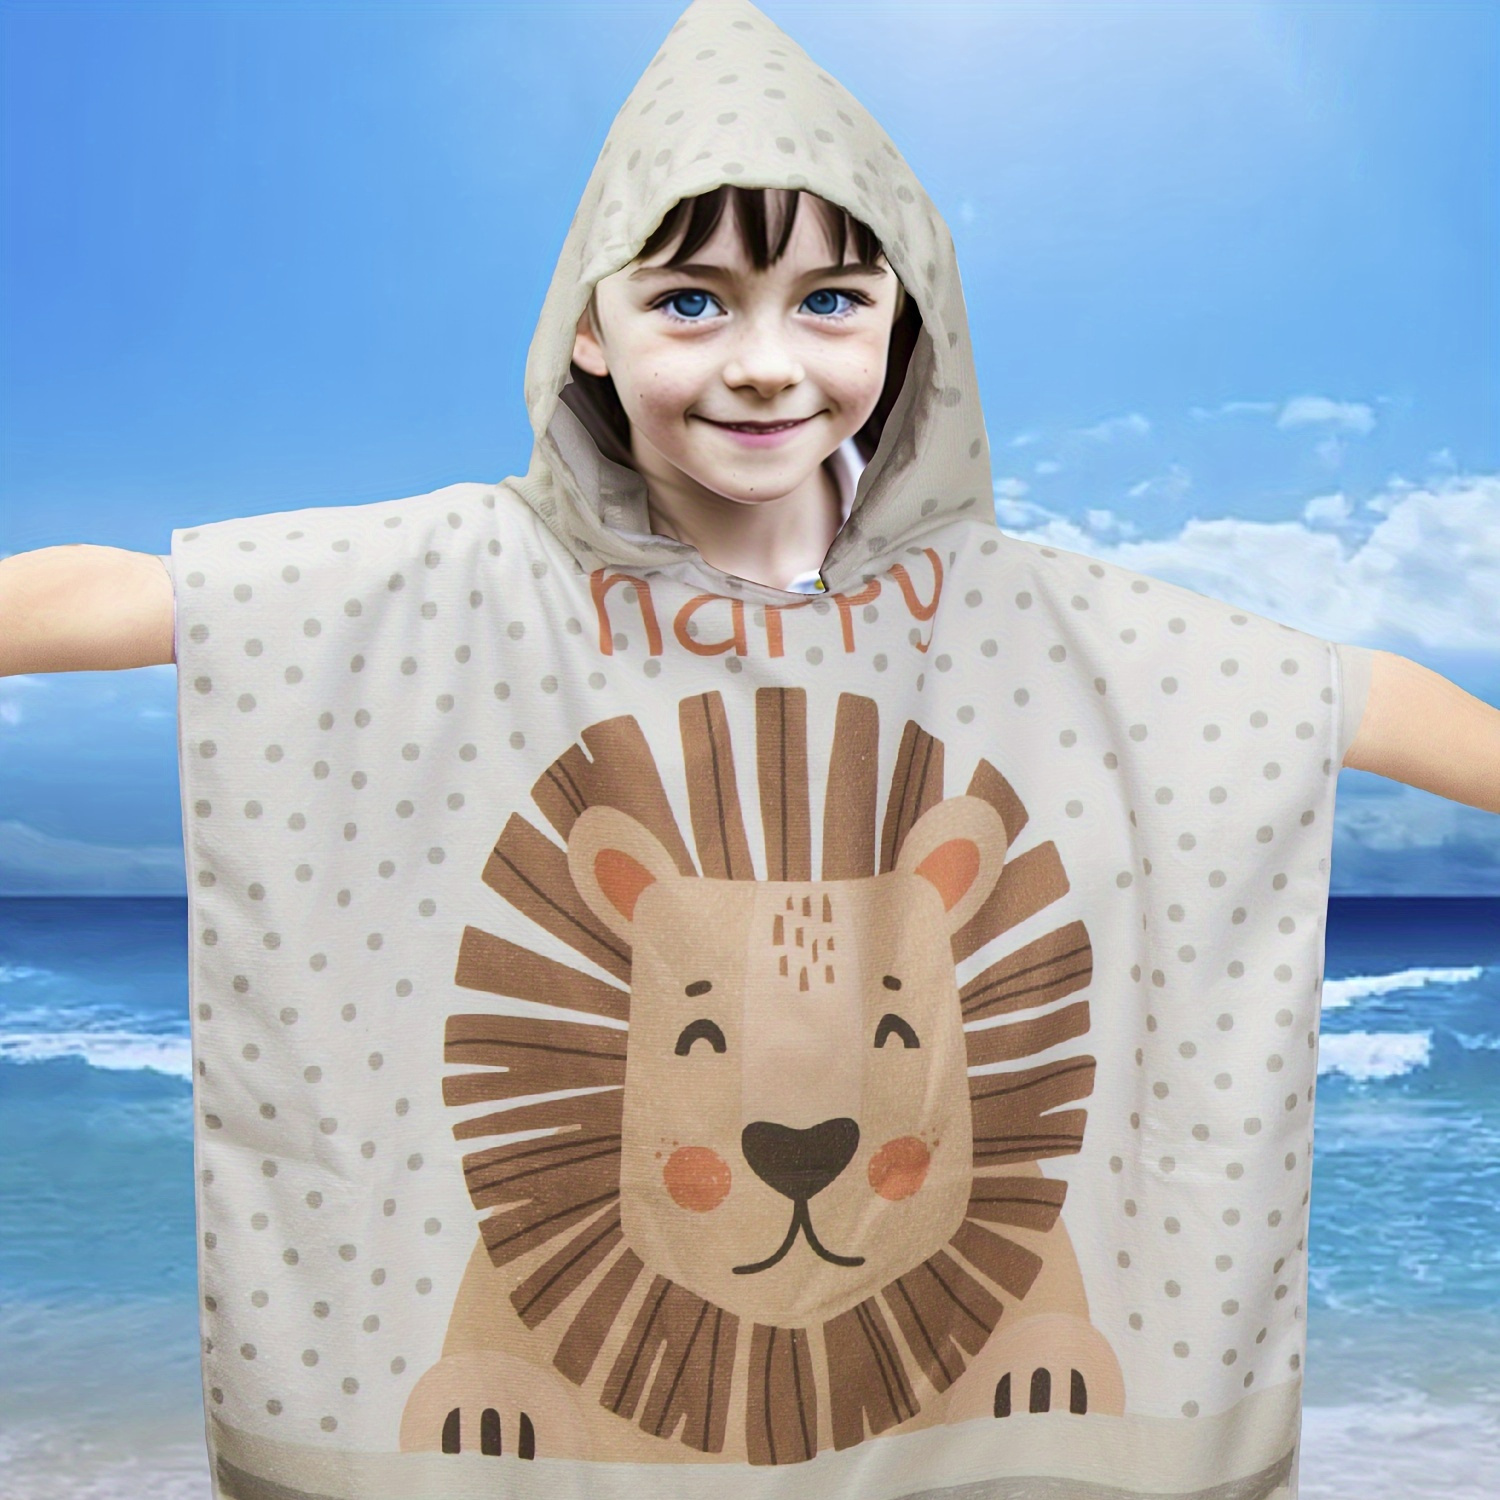 

1pc Cartoon Lion Multi-functional Children's Hooded Bathrobe, Lightweight Hooded Beach Towel, Soft And Comfortable Loungewear Nightgown For Pool Beach Travel Adventures